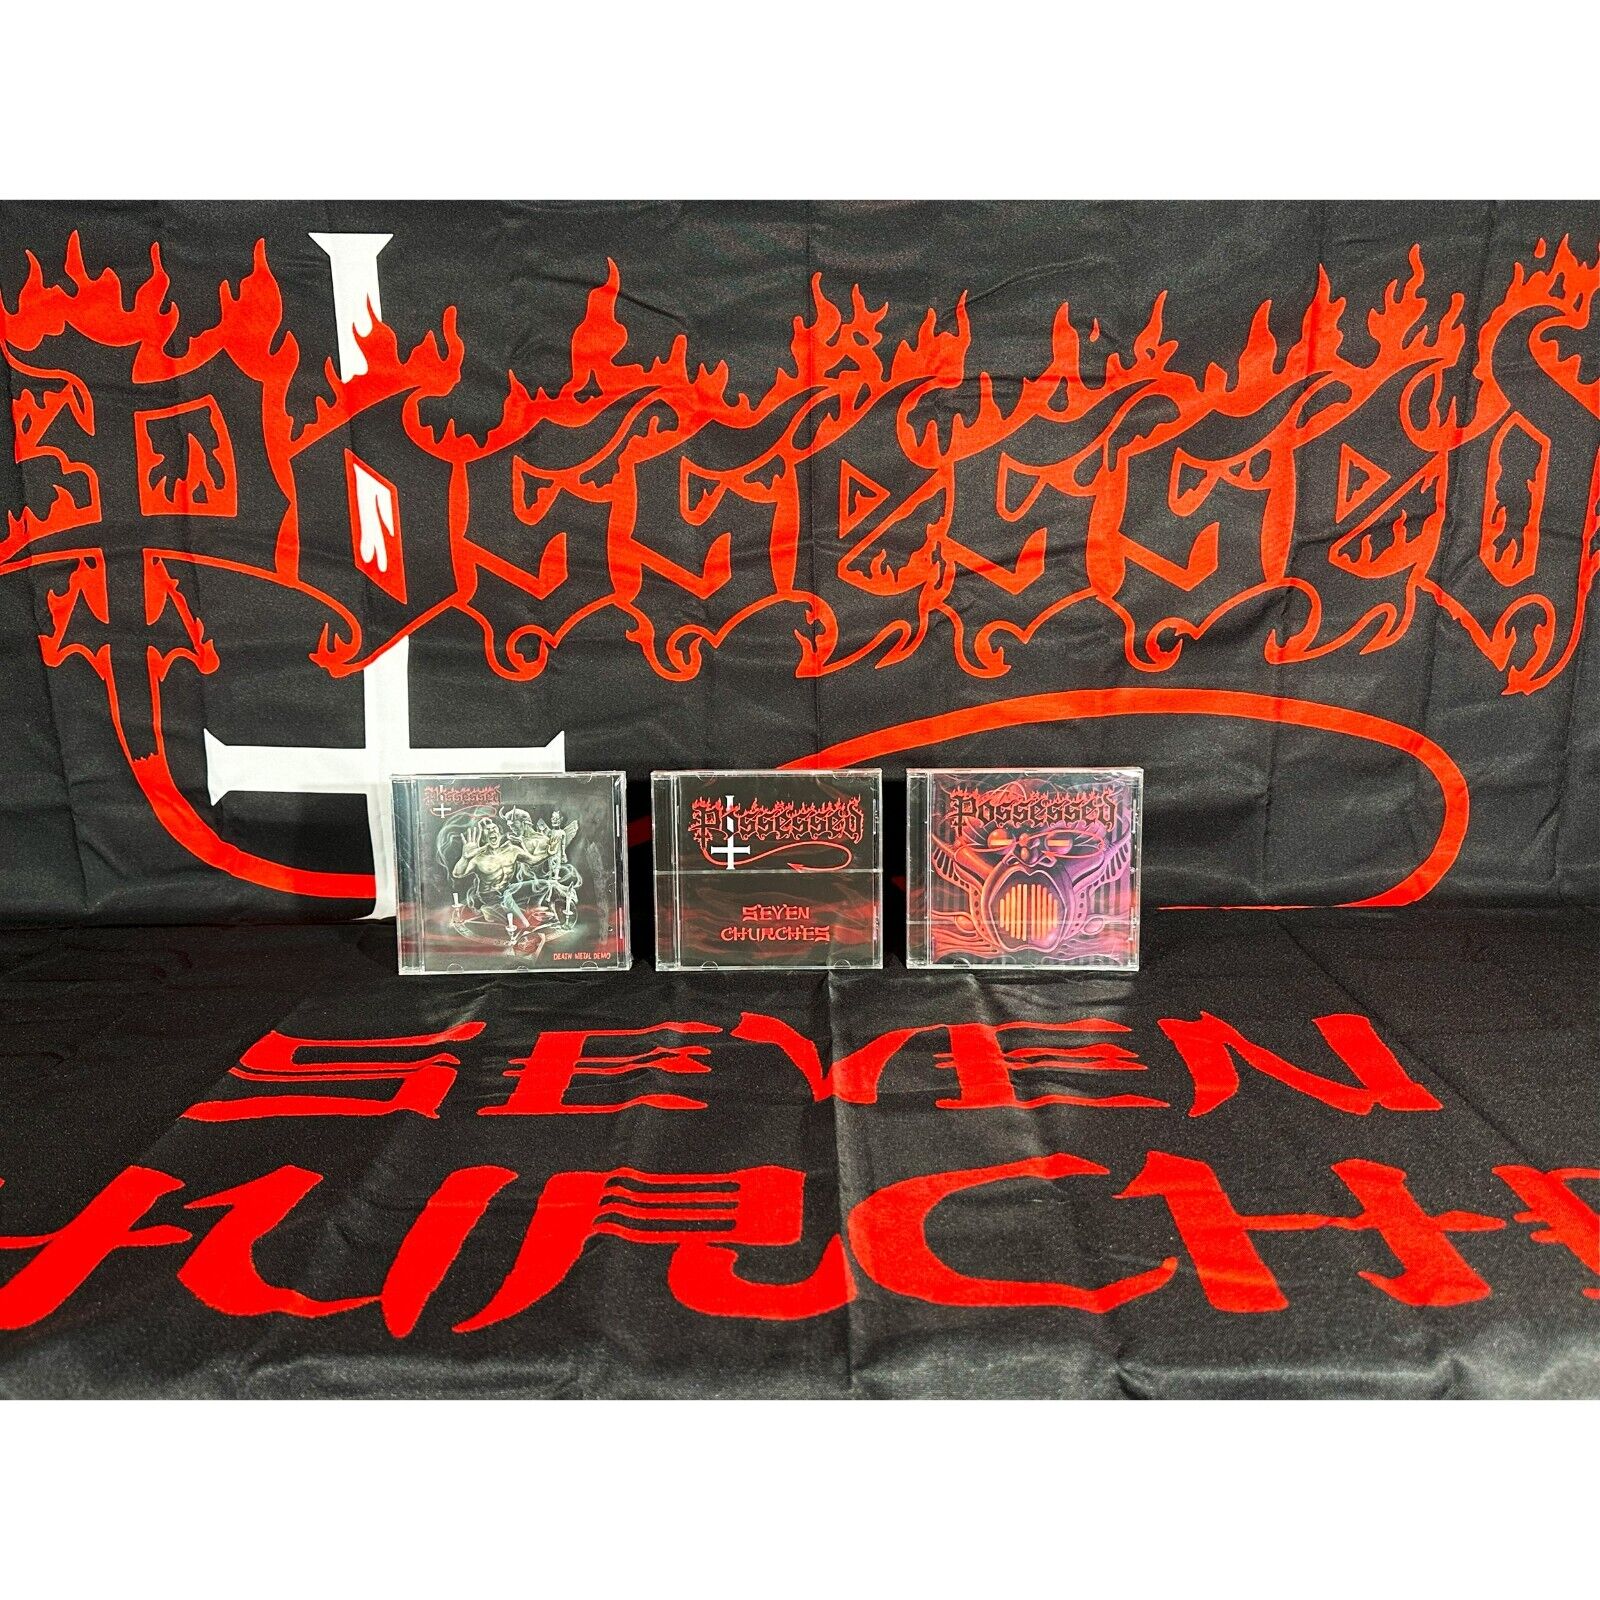 POSSESSED Death Metal Demo / Seven Churches / Beyond The Gates 3x CD with Flag